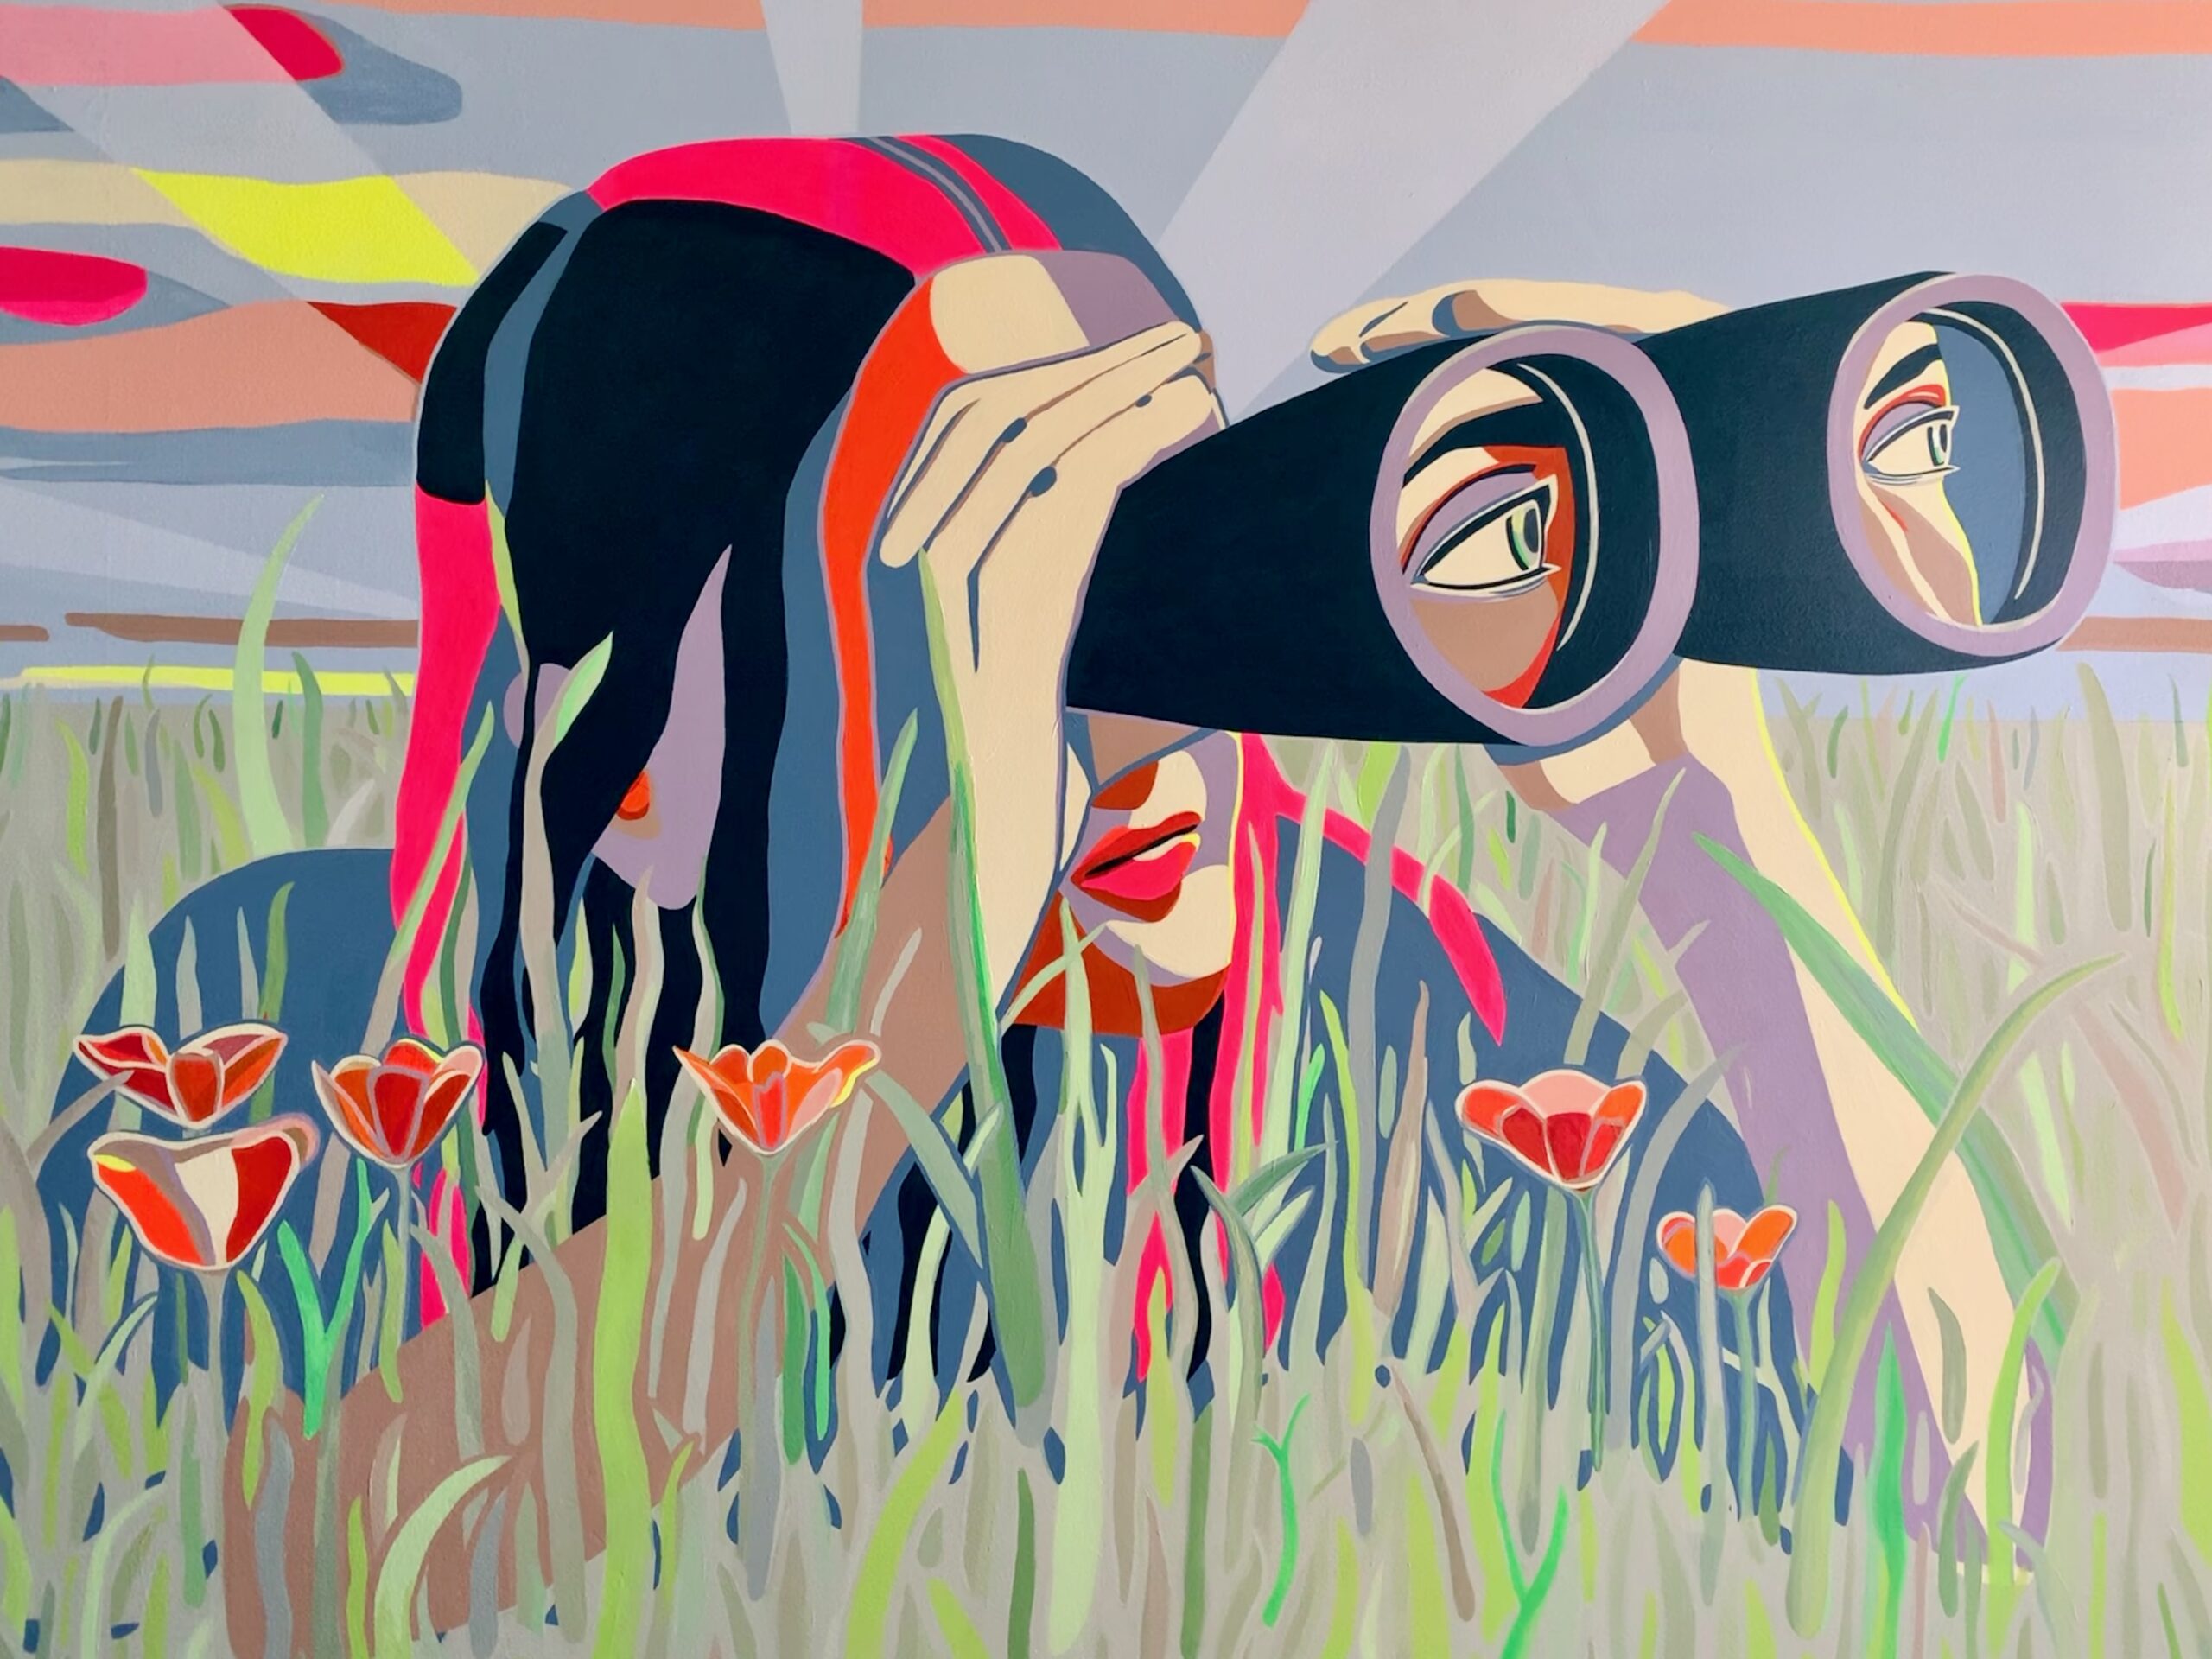 Painting of a stylized woman looking through binoculars, lying in tall grass